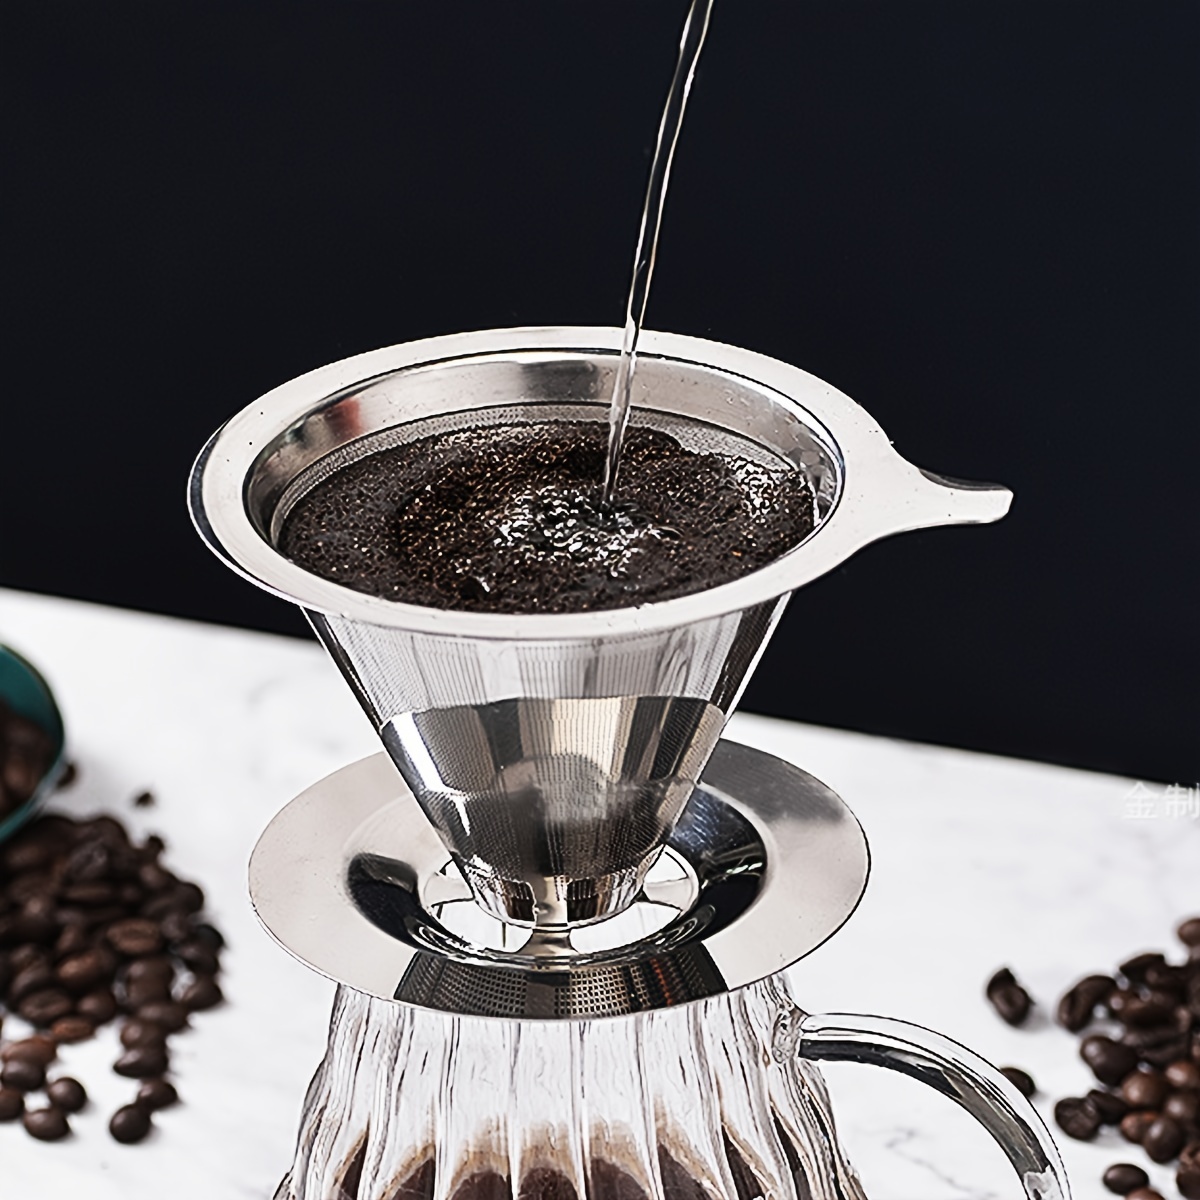  Pour Over Coffee Maker with Stainless Steel Filter